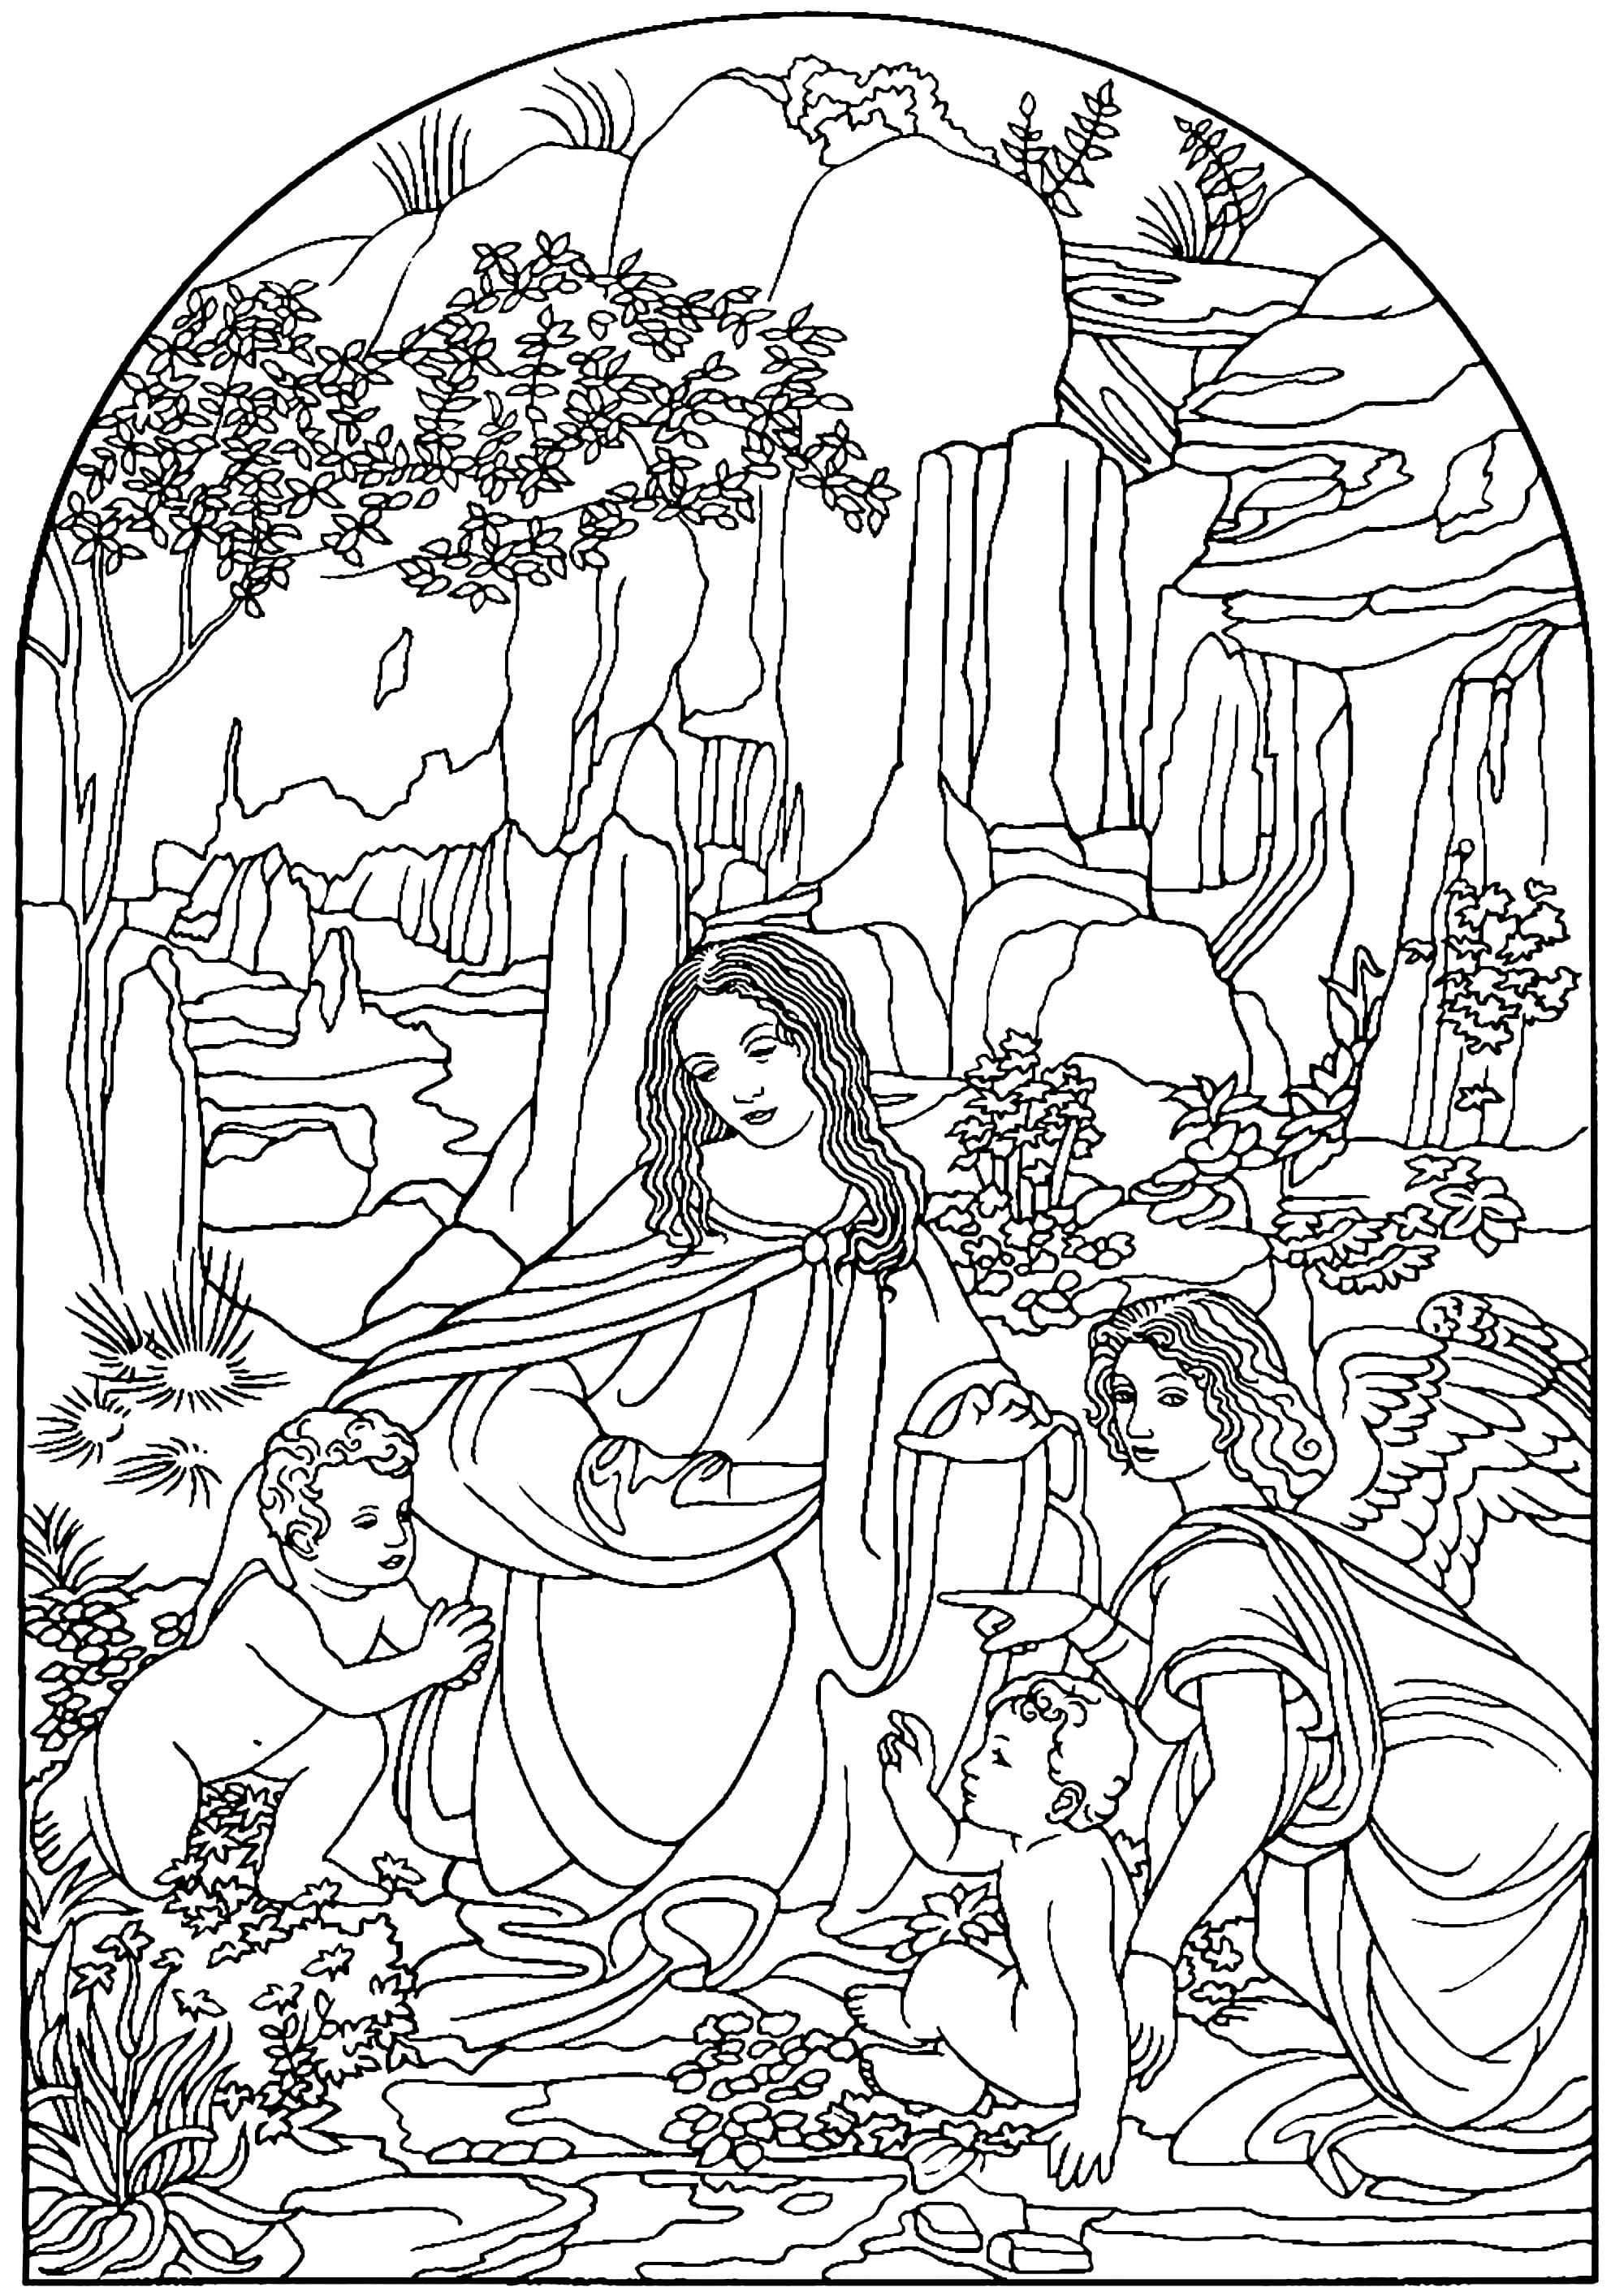 Coloring page created from Leonardo da Vinci's painting 'Virgin of the rocks' (1491) (National Gallery London version). This version is the second version finally accepted by the confraternity replacing the first rejected version now in the Louvre, Paris. Leonardo painted both in Milan, where he had moved from Florence.